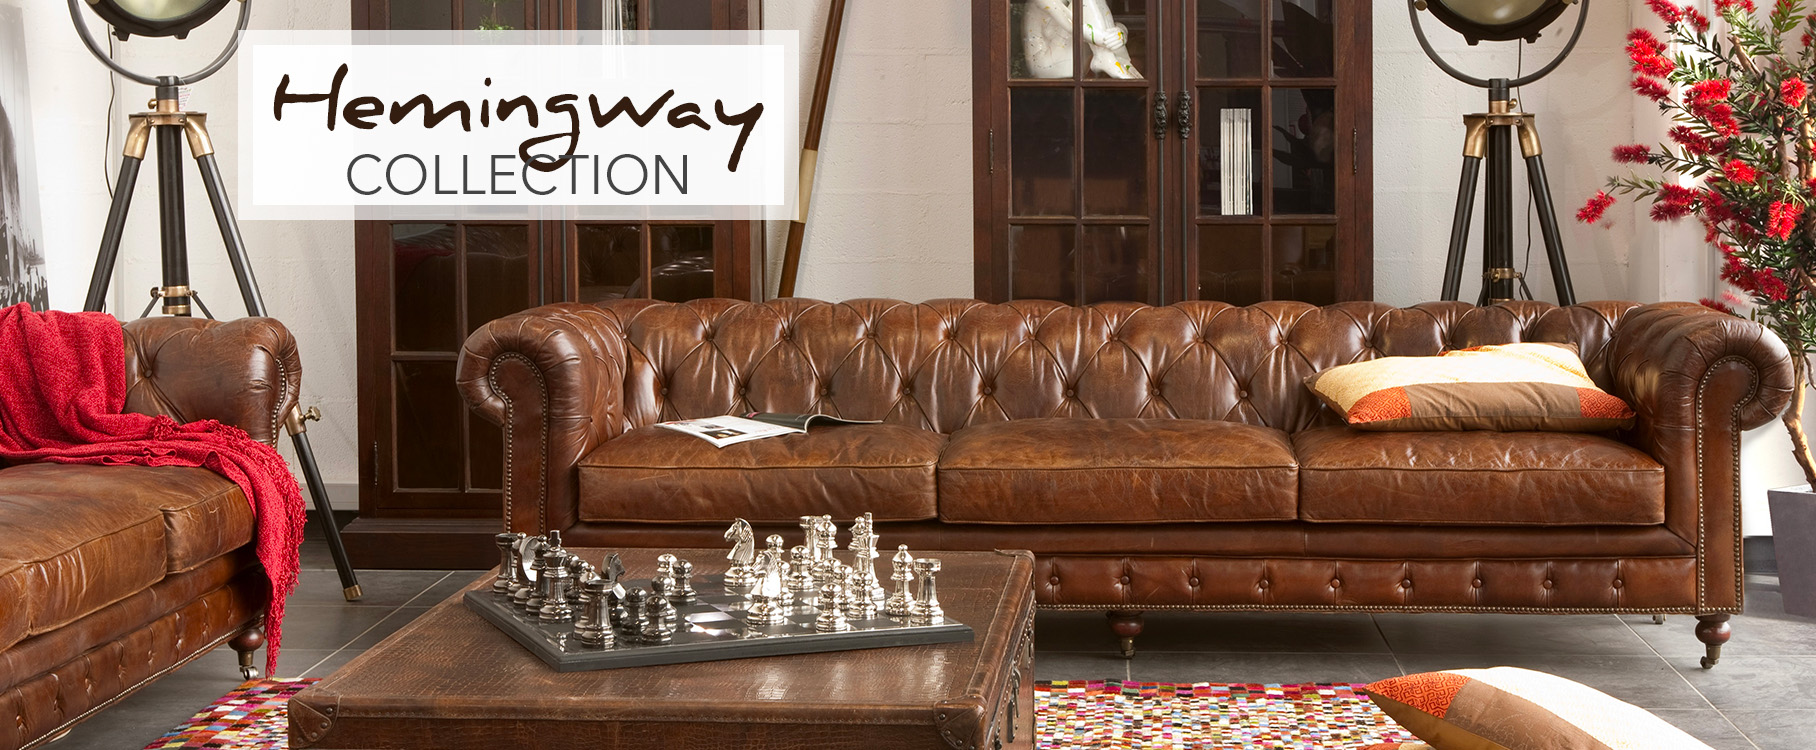 The Hemingway collection, almost exclusively composed of leather seats, transports you directly to the English gentlemen's club of the 18th century.